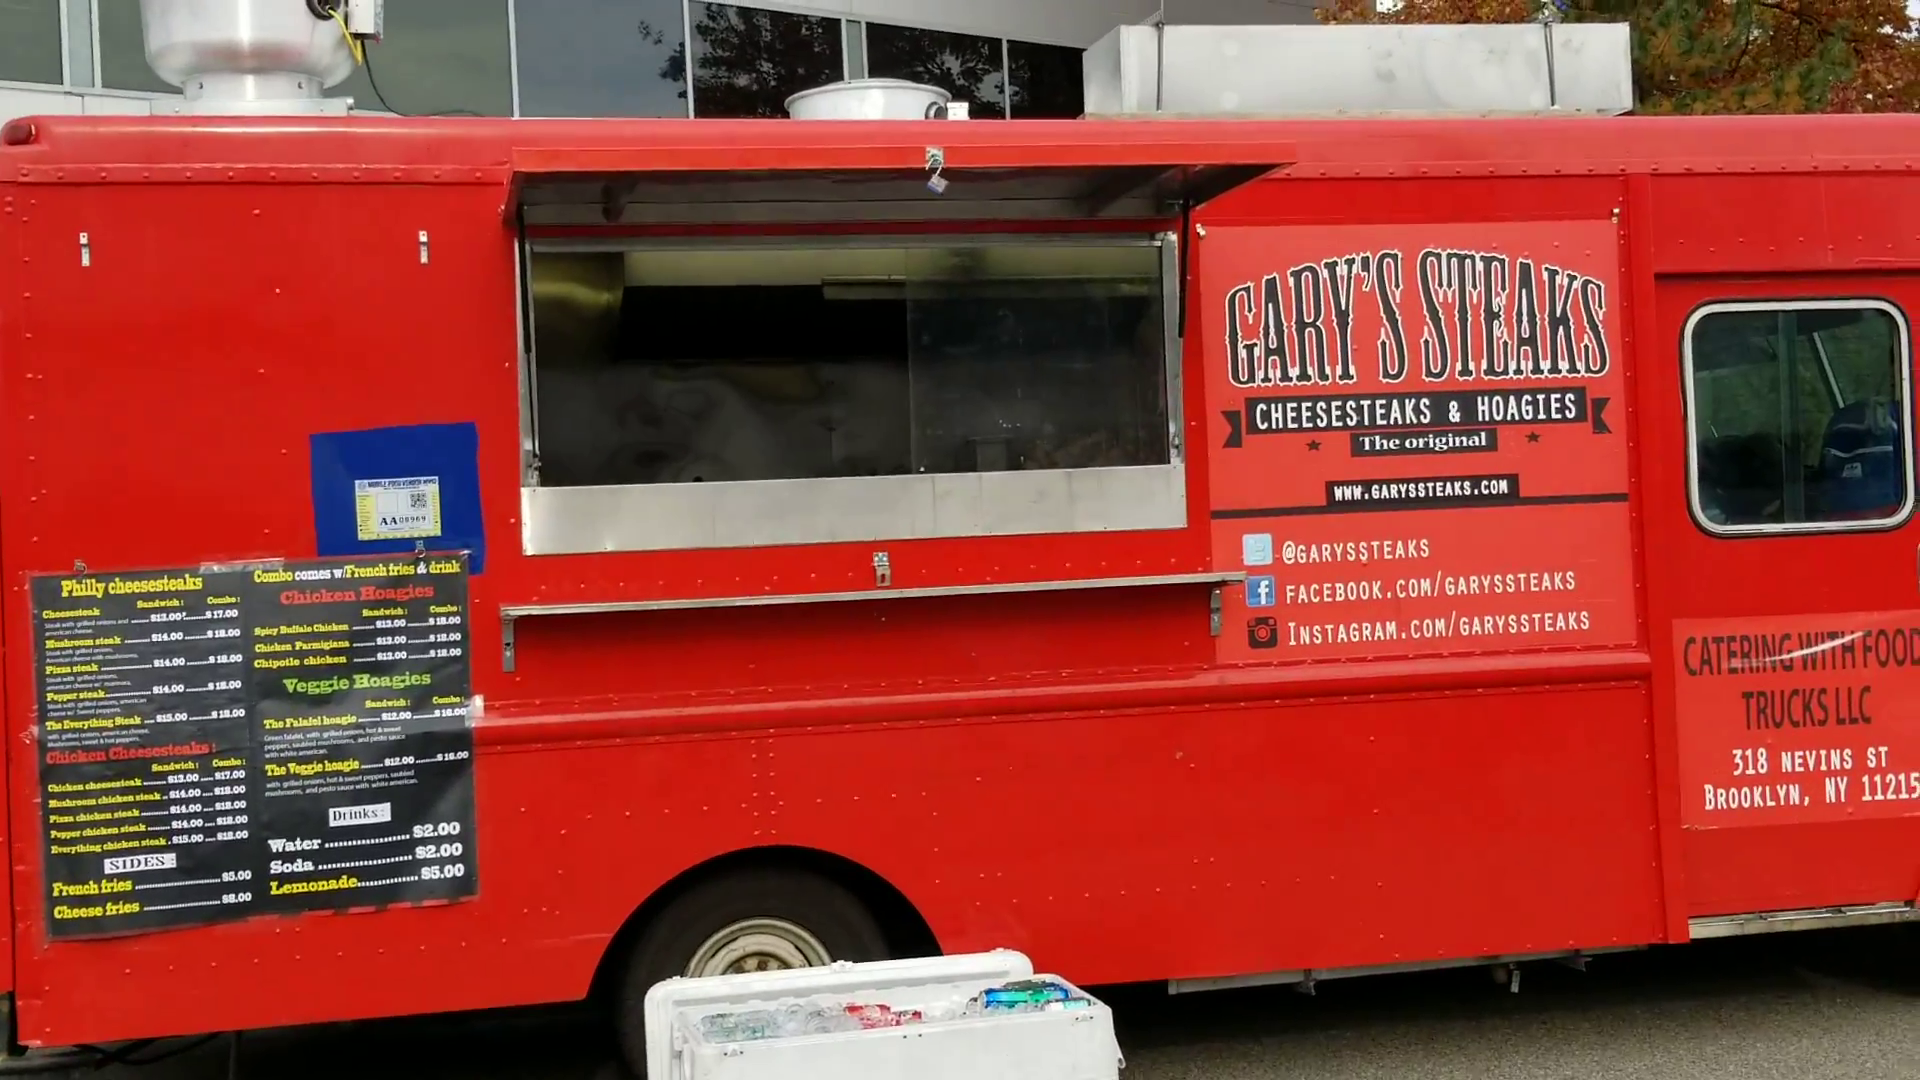 Garyssteaks catering food truck at the NBC universal facility in NJ for the CNBC TV Channel 5k